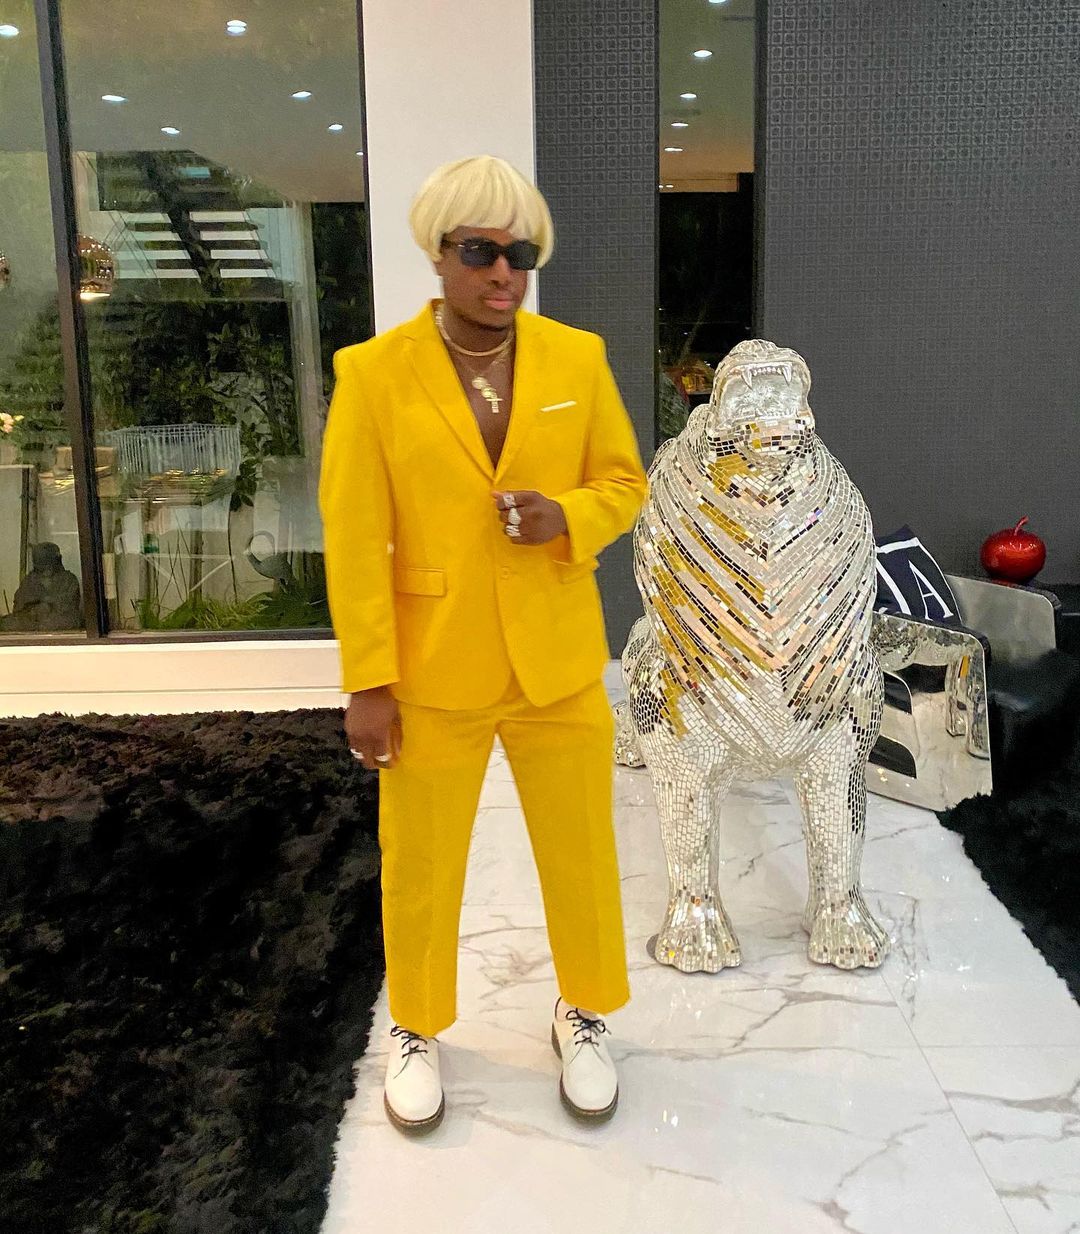 The Best-Dressed Creatives On Instagram For Halloween